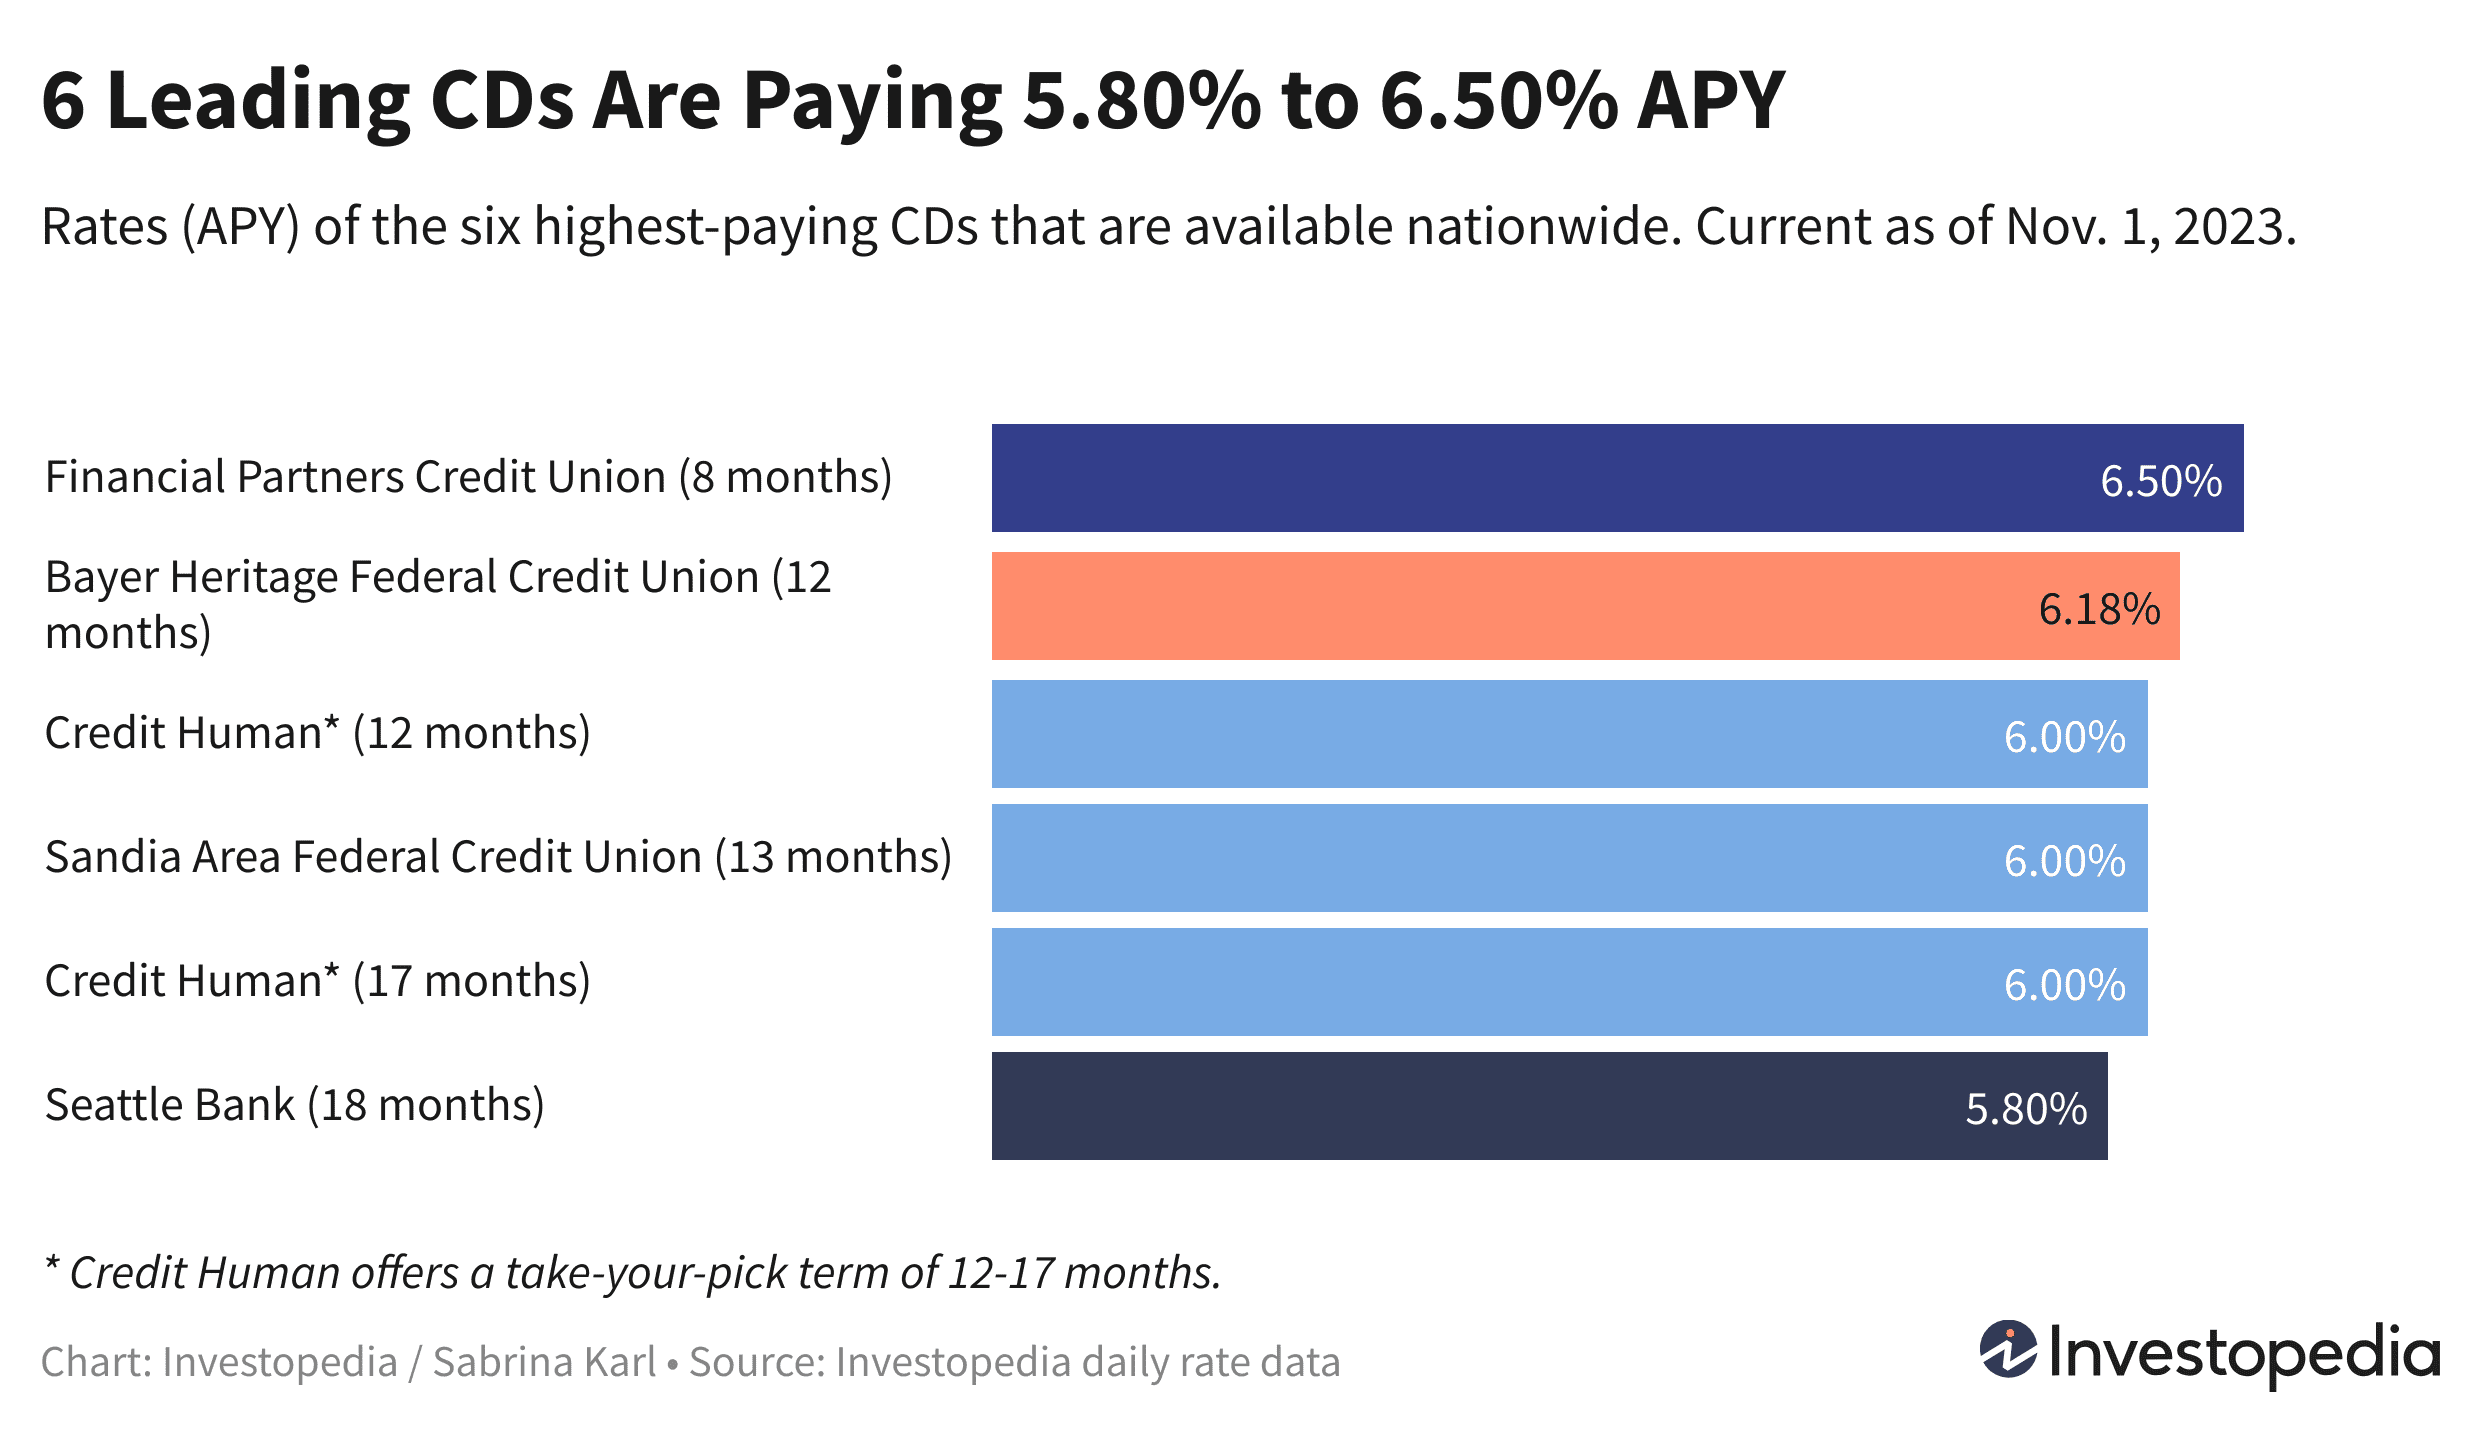 Bar graph showing the 6 leading CD rates, which range from 5.80% to 6.50% APY